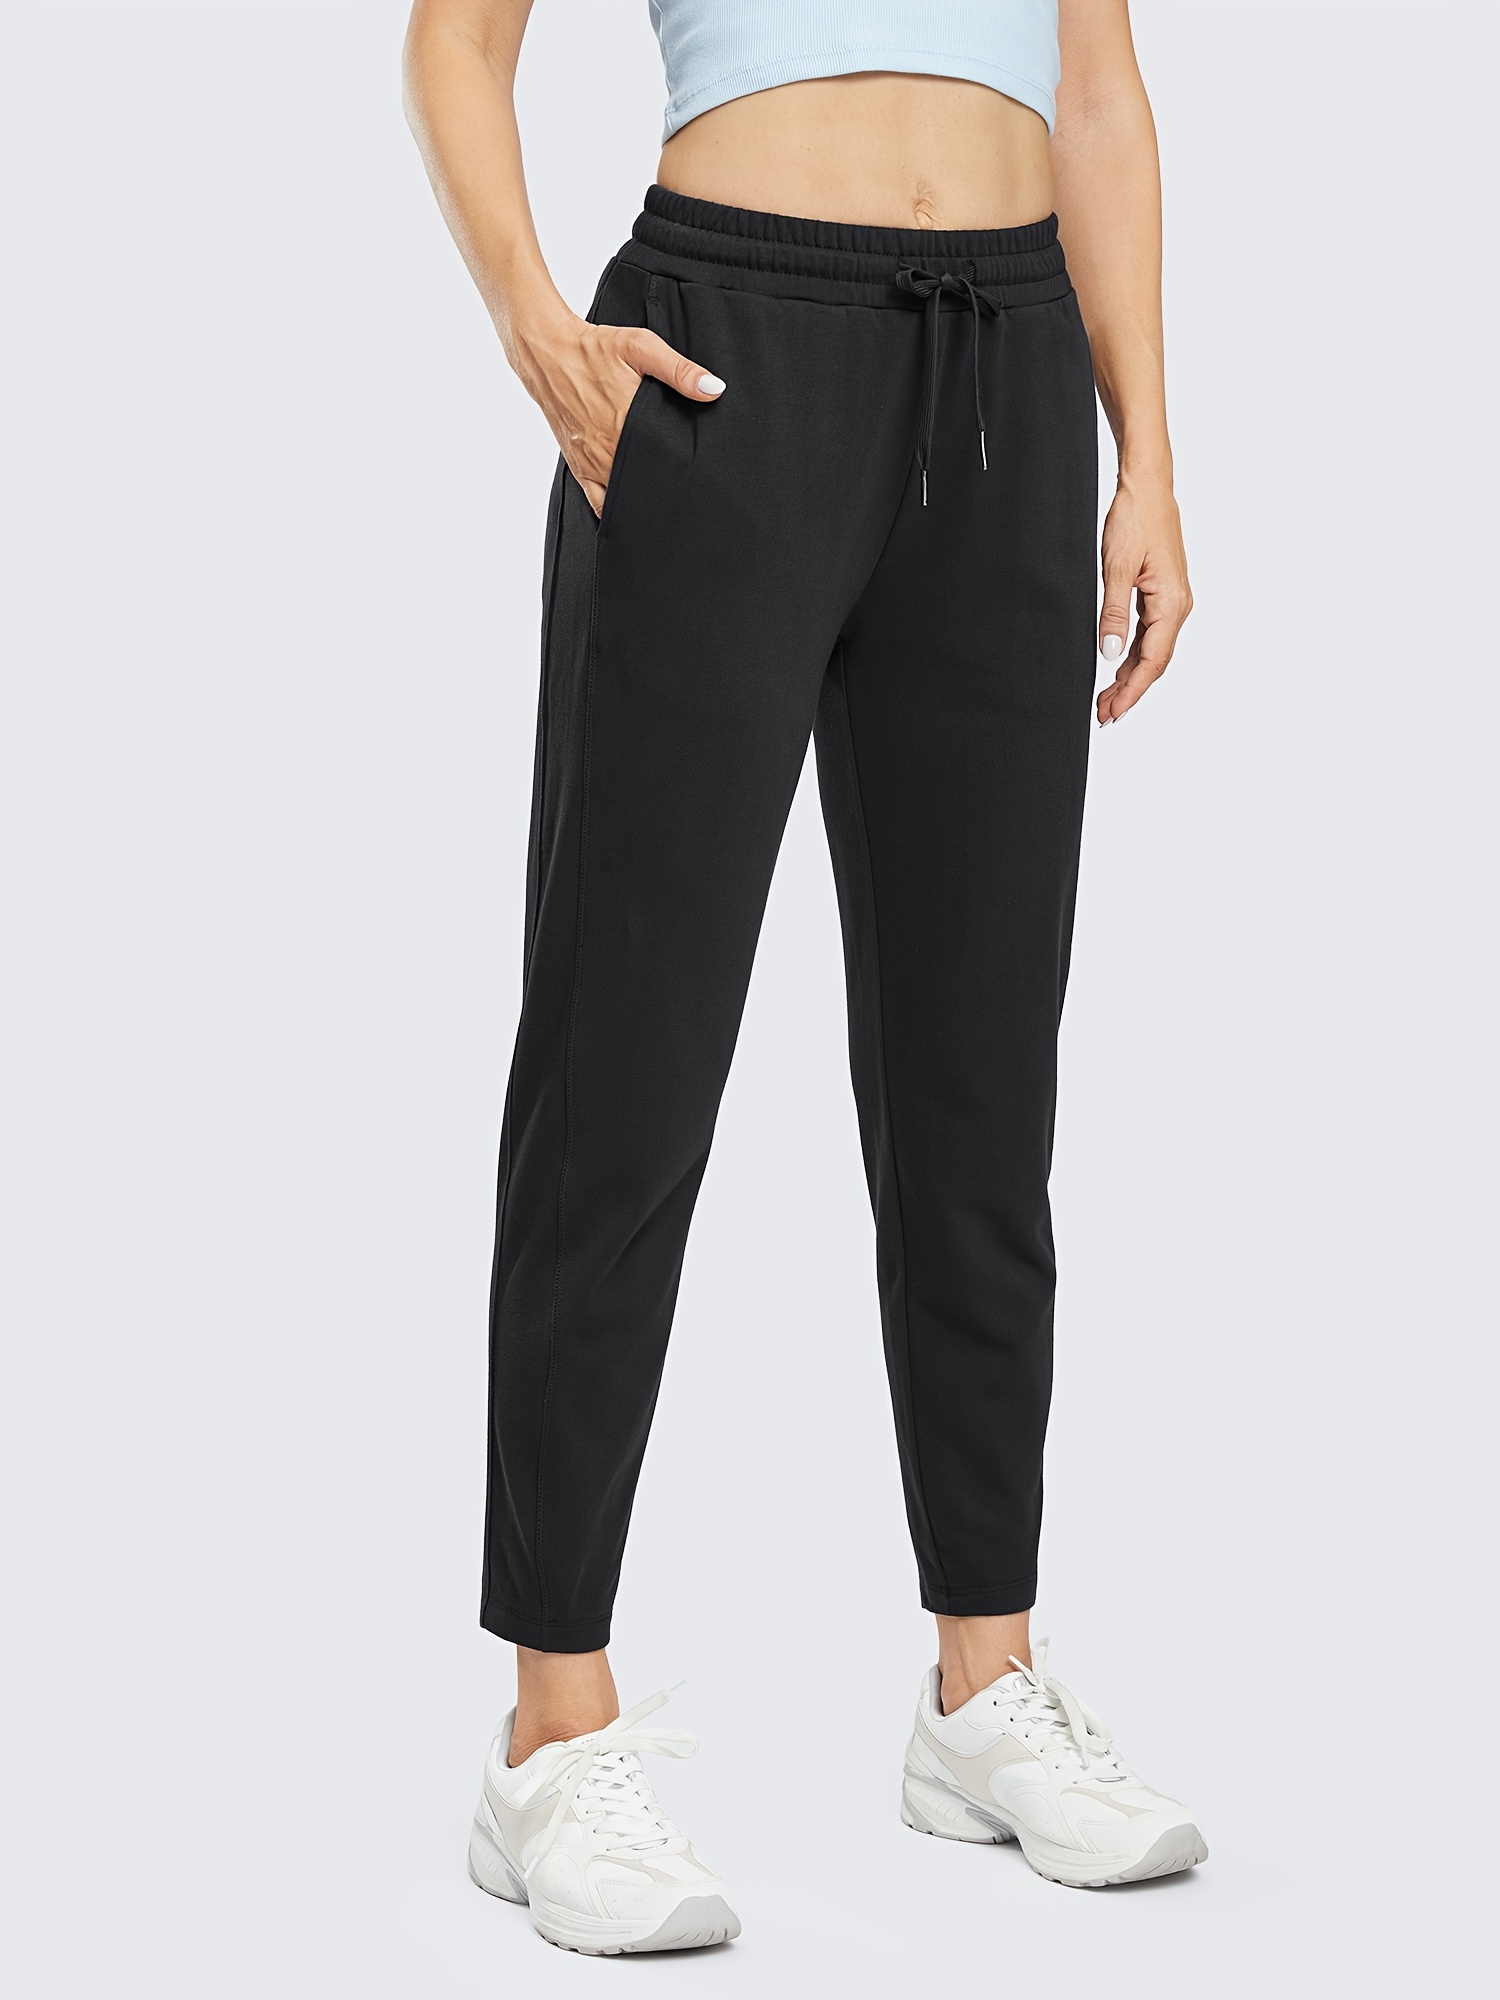 Women's Tapered Lounge Sweatpants with Pockets for Yoga, Running, Training